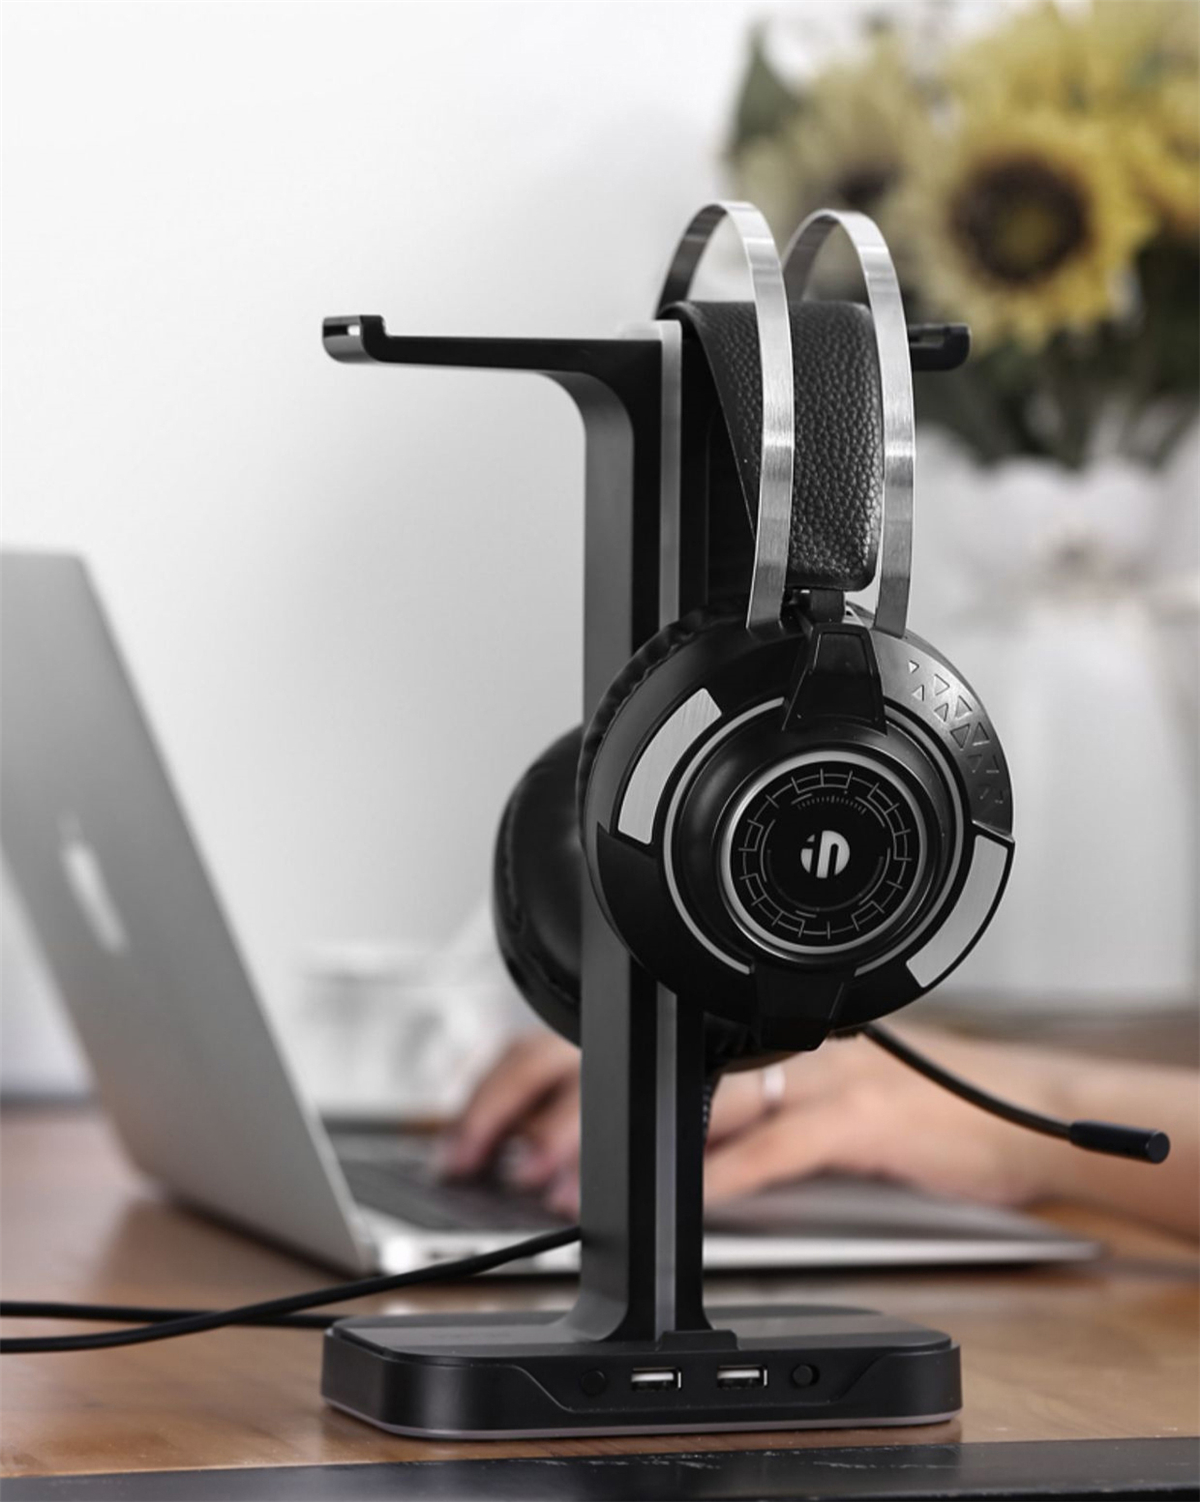 Inphic-H100-Headset-Stand-Dual-USB-Ports-Colorful-Light-Base-Headphone-Hanger-Headset-Mount-Holder-O-1742022-6